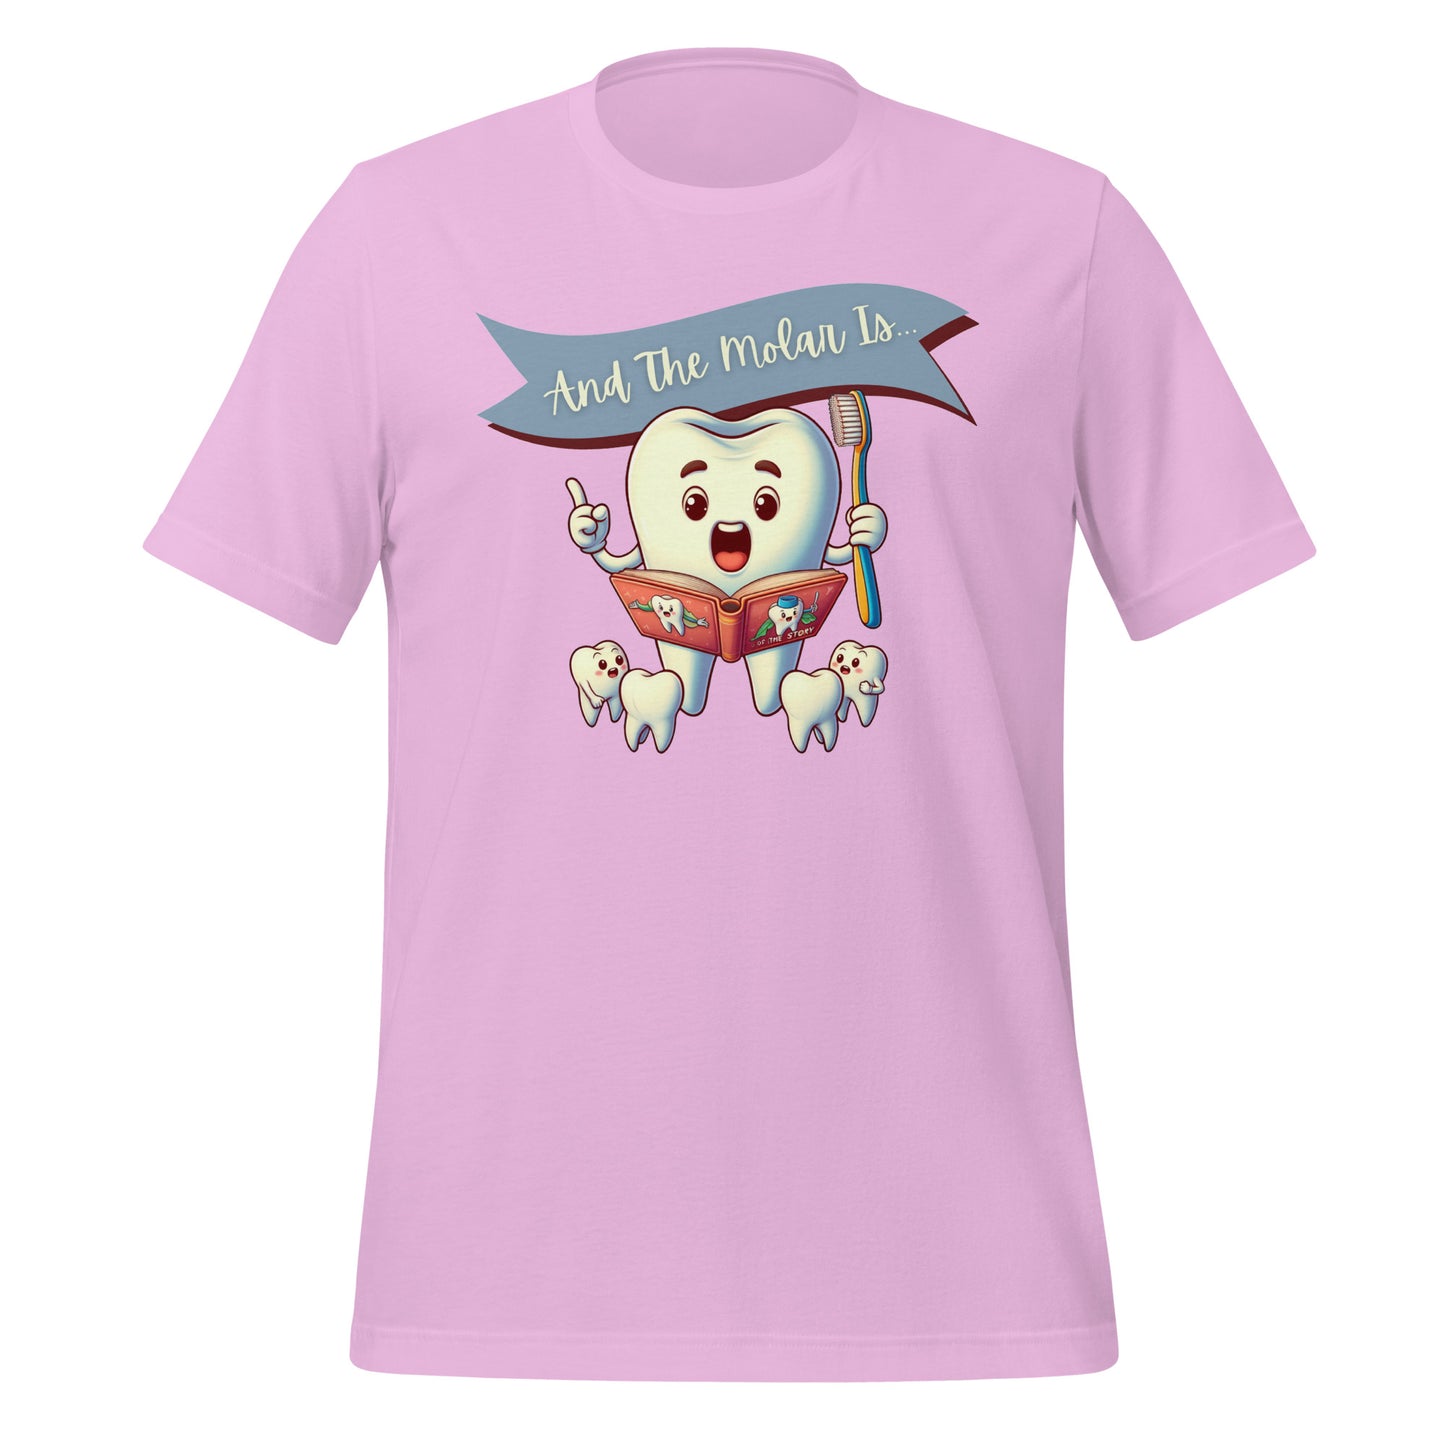 Cute dental shirt featuring a smiling tooth character reading a book with the caption ‘And The Molar Is,’ surrounded by smaller tooth characters. Lilac color.